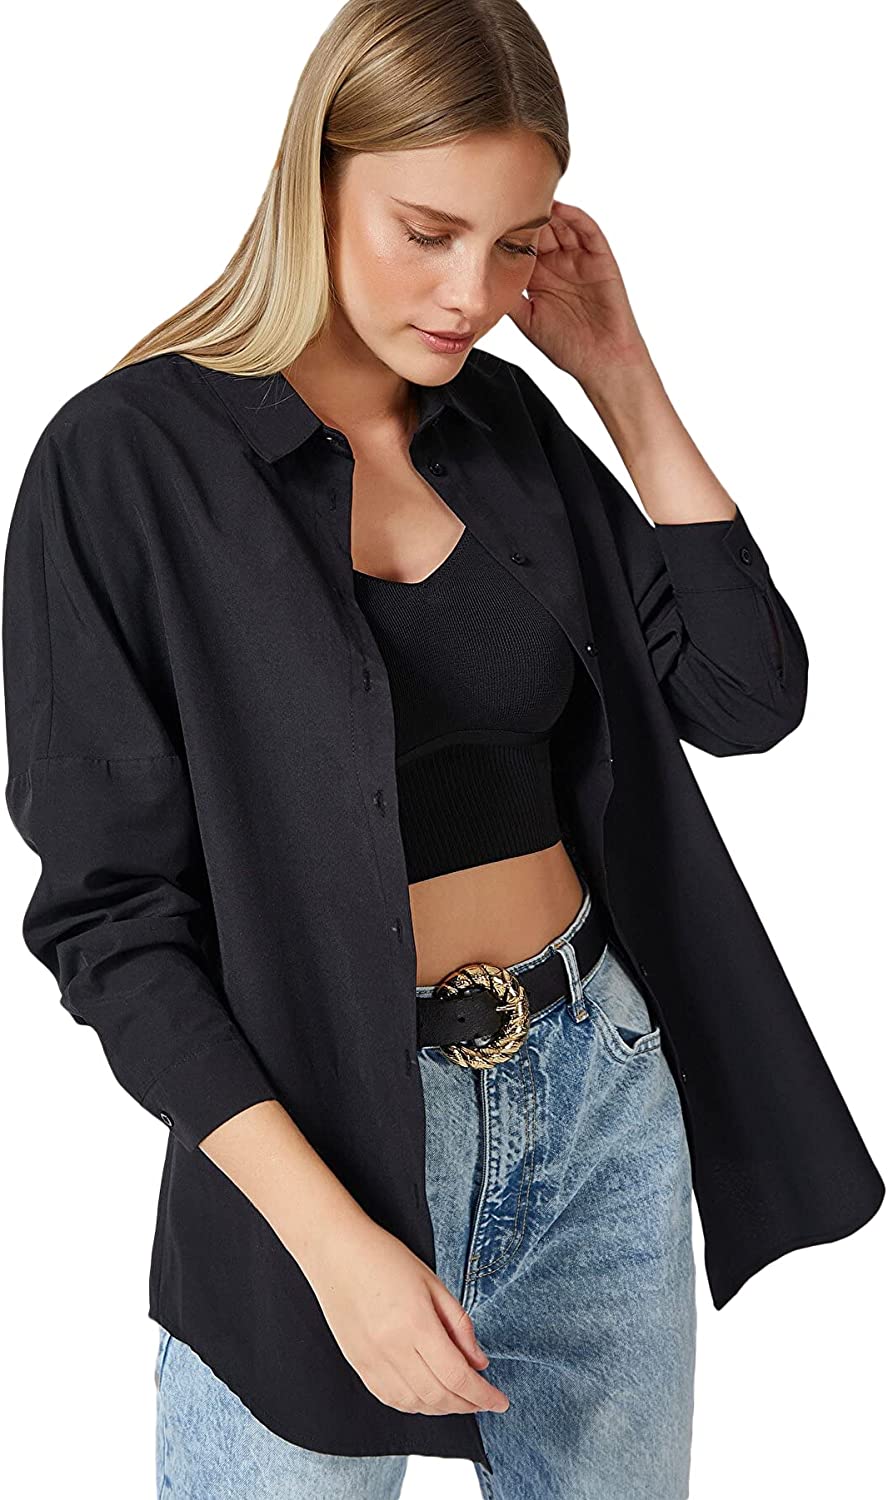 Loose Fit City Chic Black Long Sleeve Button Down Blouse